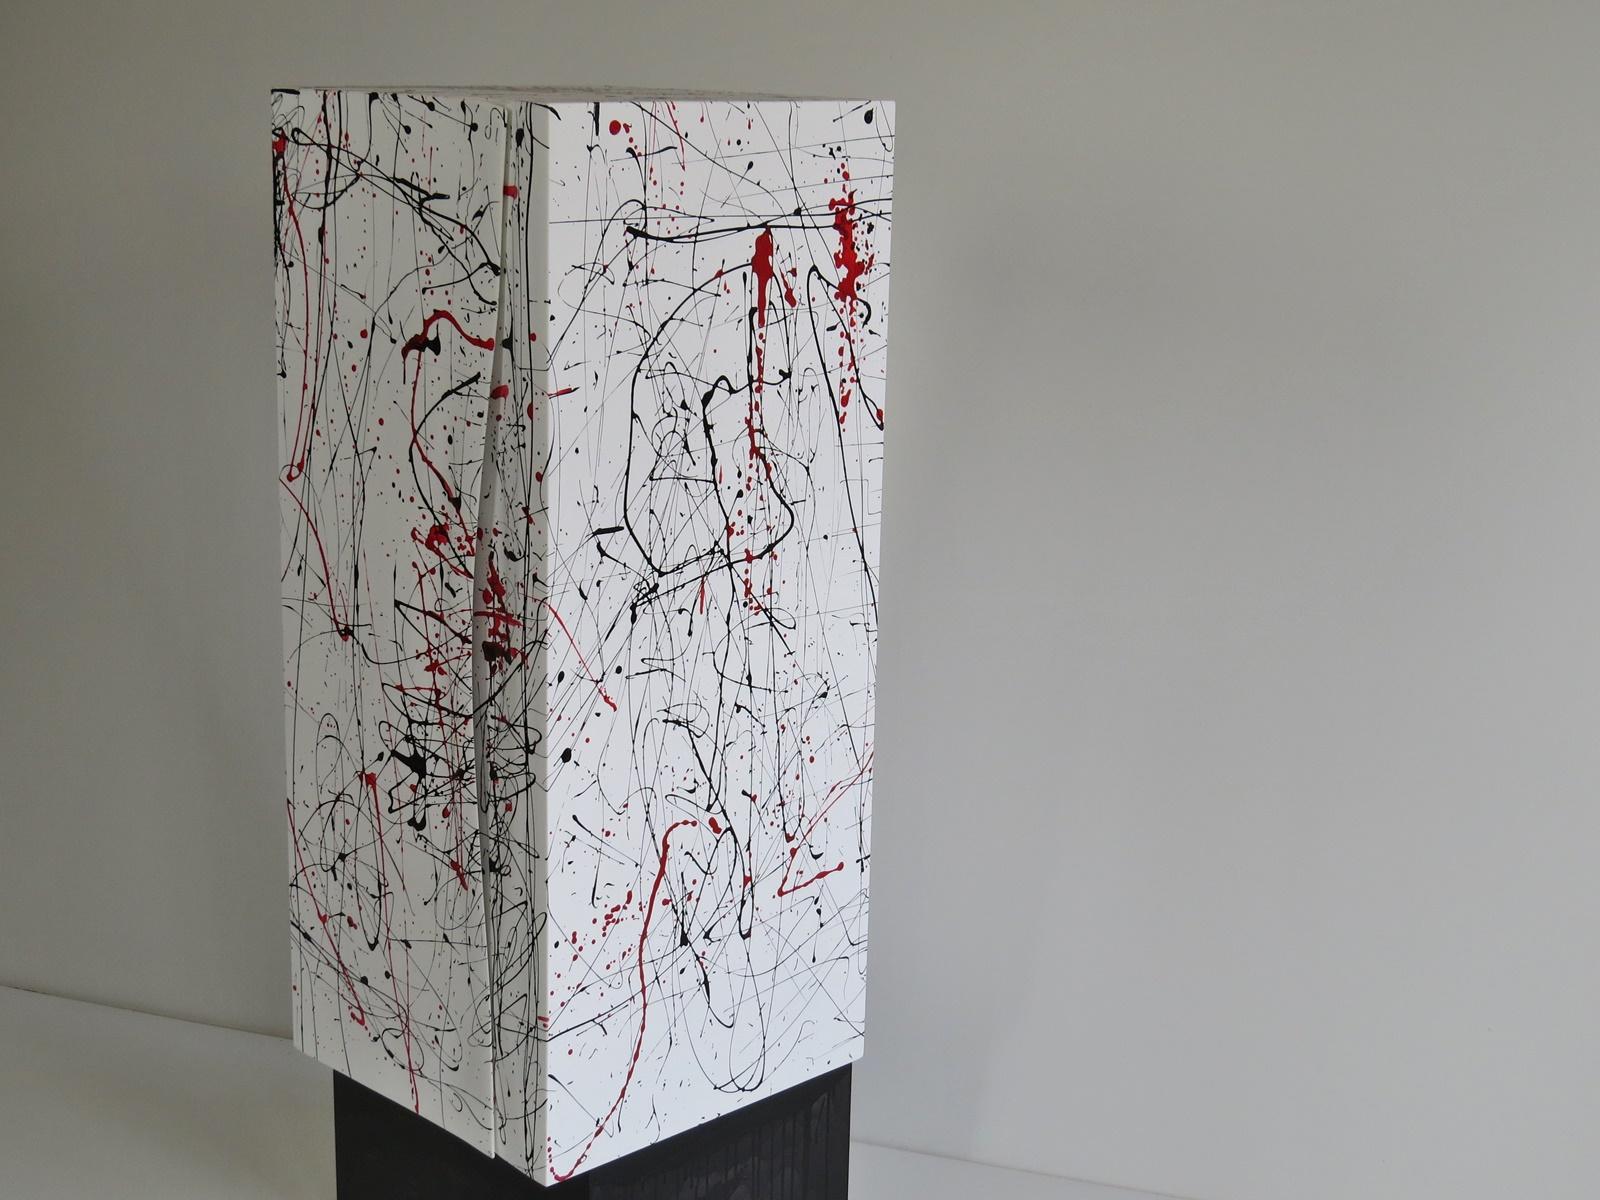 Handmade cube furniture
sculptural furniture practical and eye-catcher at the same time!
Artwork as a tribute to Jackson Pollock
The white cube with integrated doors sits offset on a black pedestal.
There are 2 shelves in it.
Ornate color